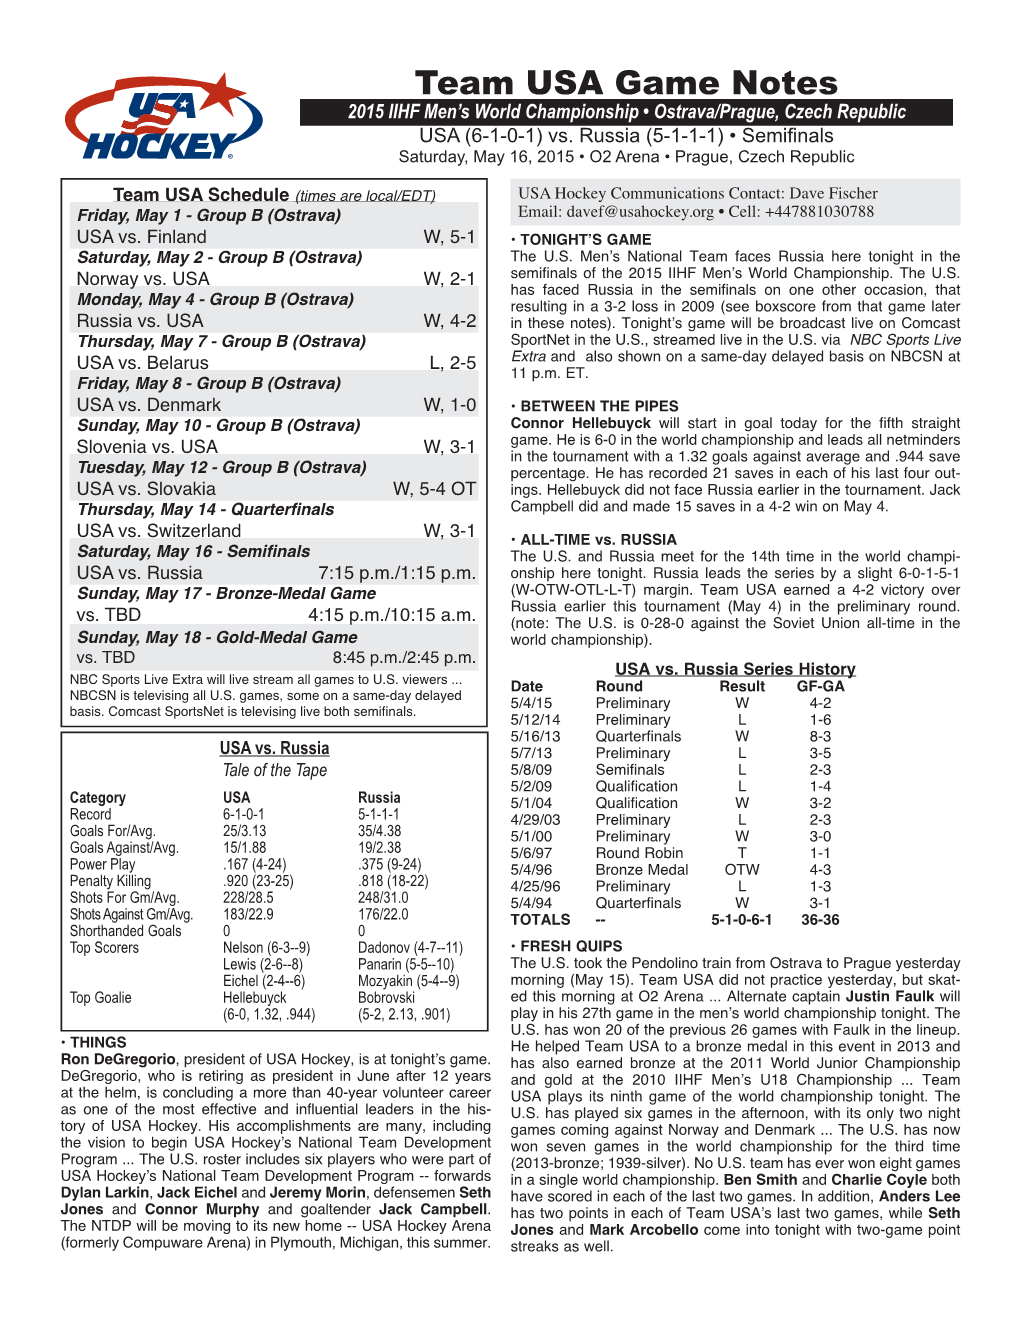 Game Notes Vs. Russia • Saturday, May 16, 2015 • 2015 IIHF Men’S World Championship • Page Two